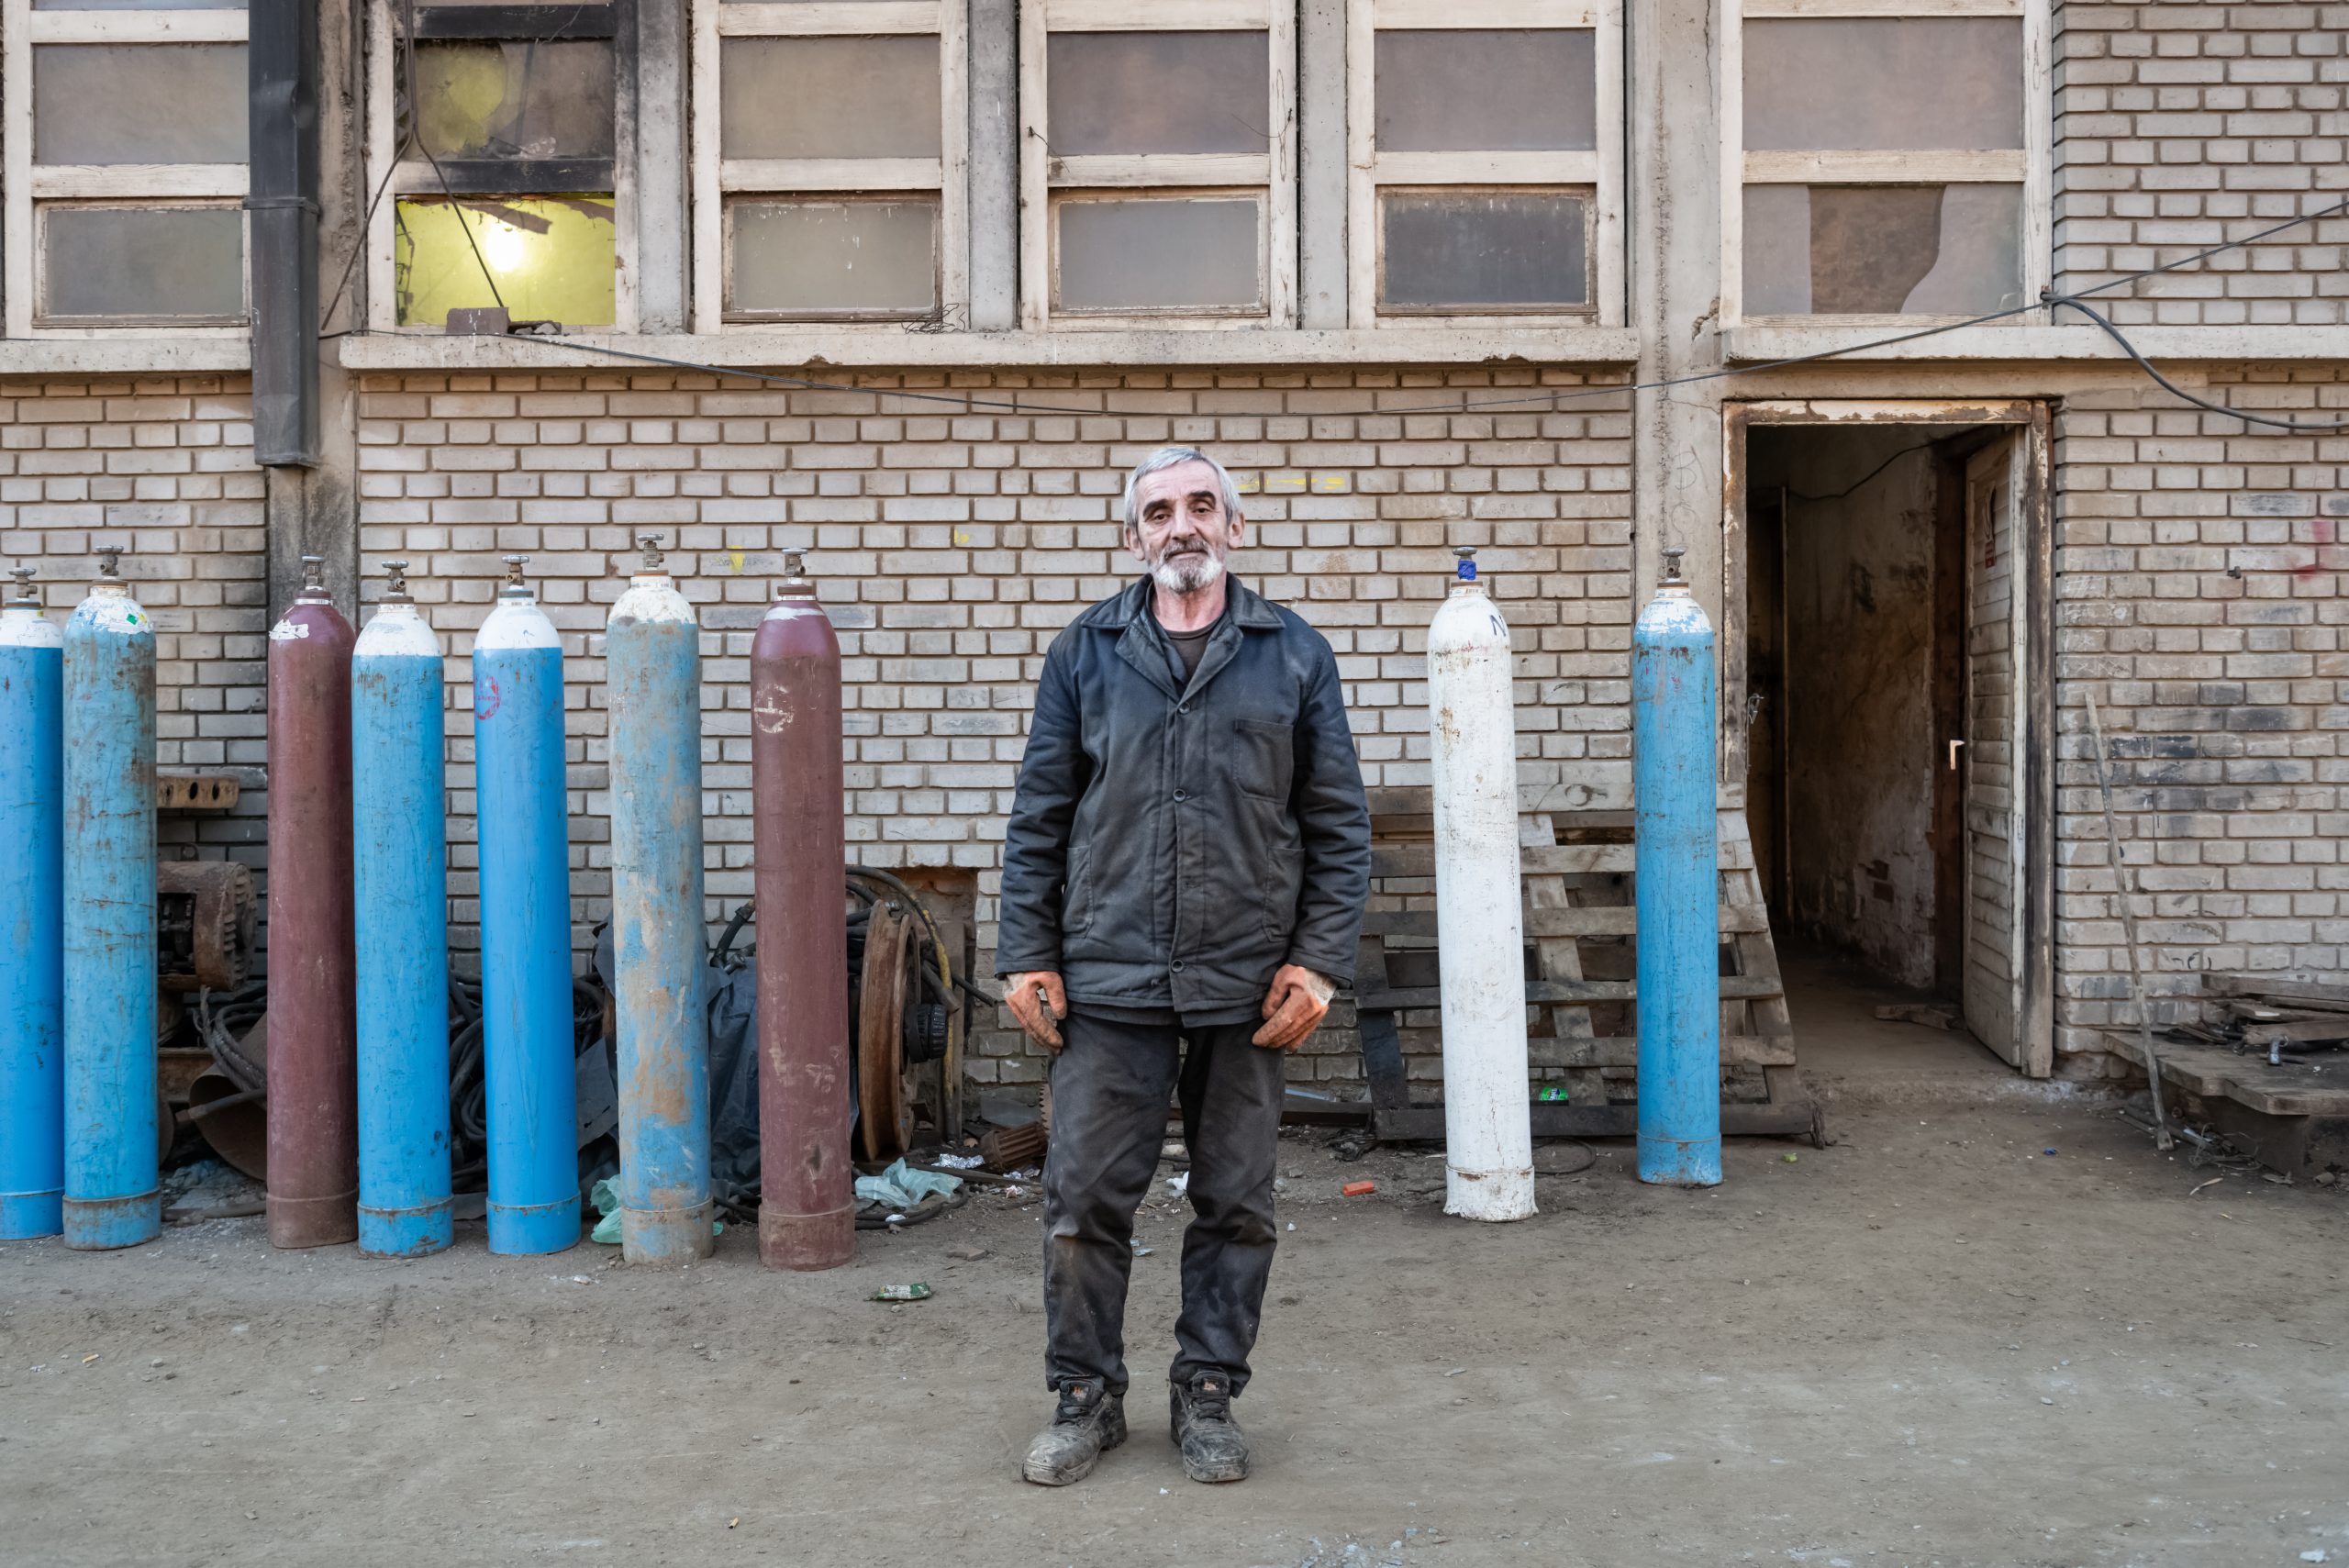 59-year-old Radoje Milovanović is a former wagon convoy driver and now is a production engineer at the Trepça facilities in Crnac.